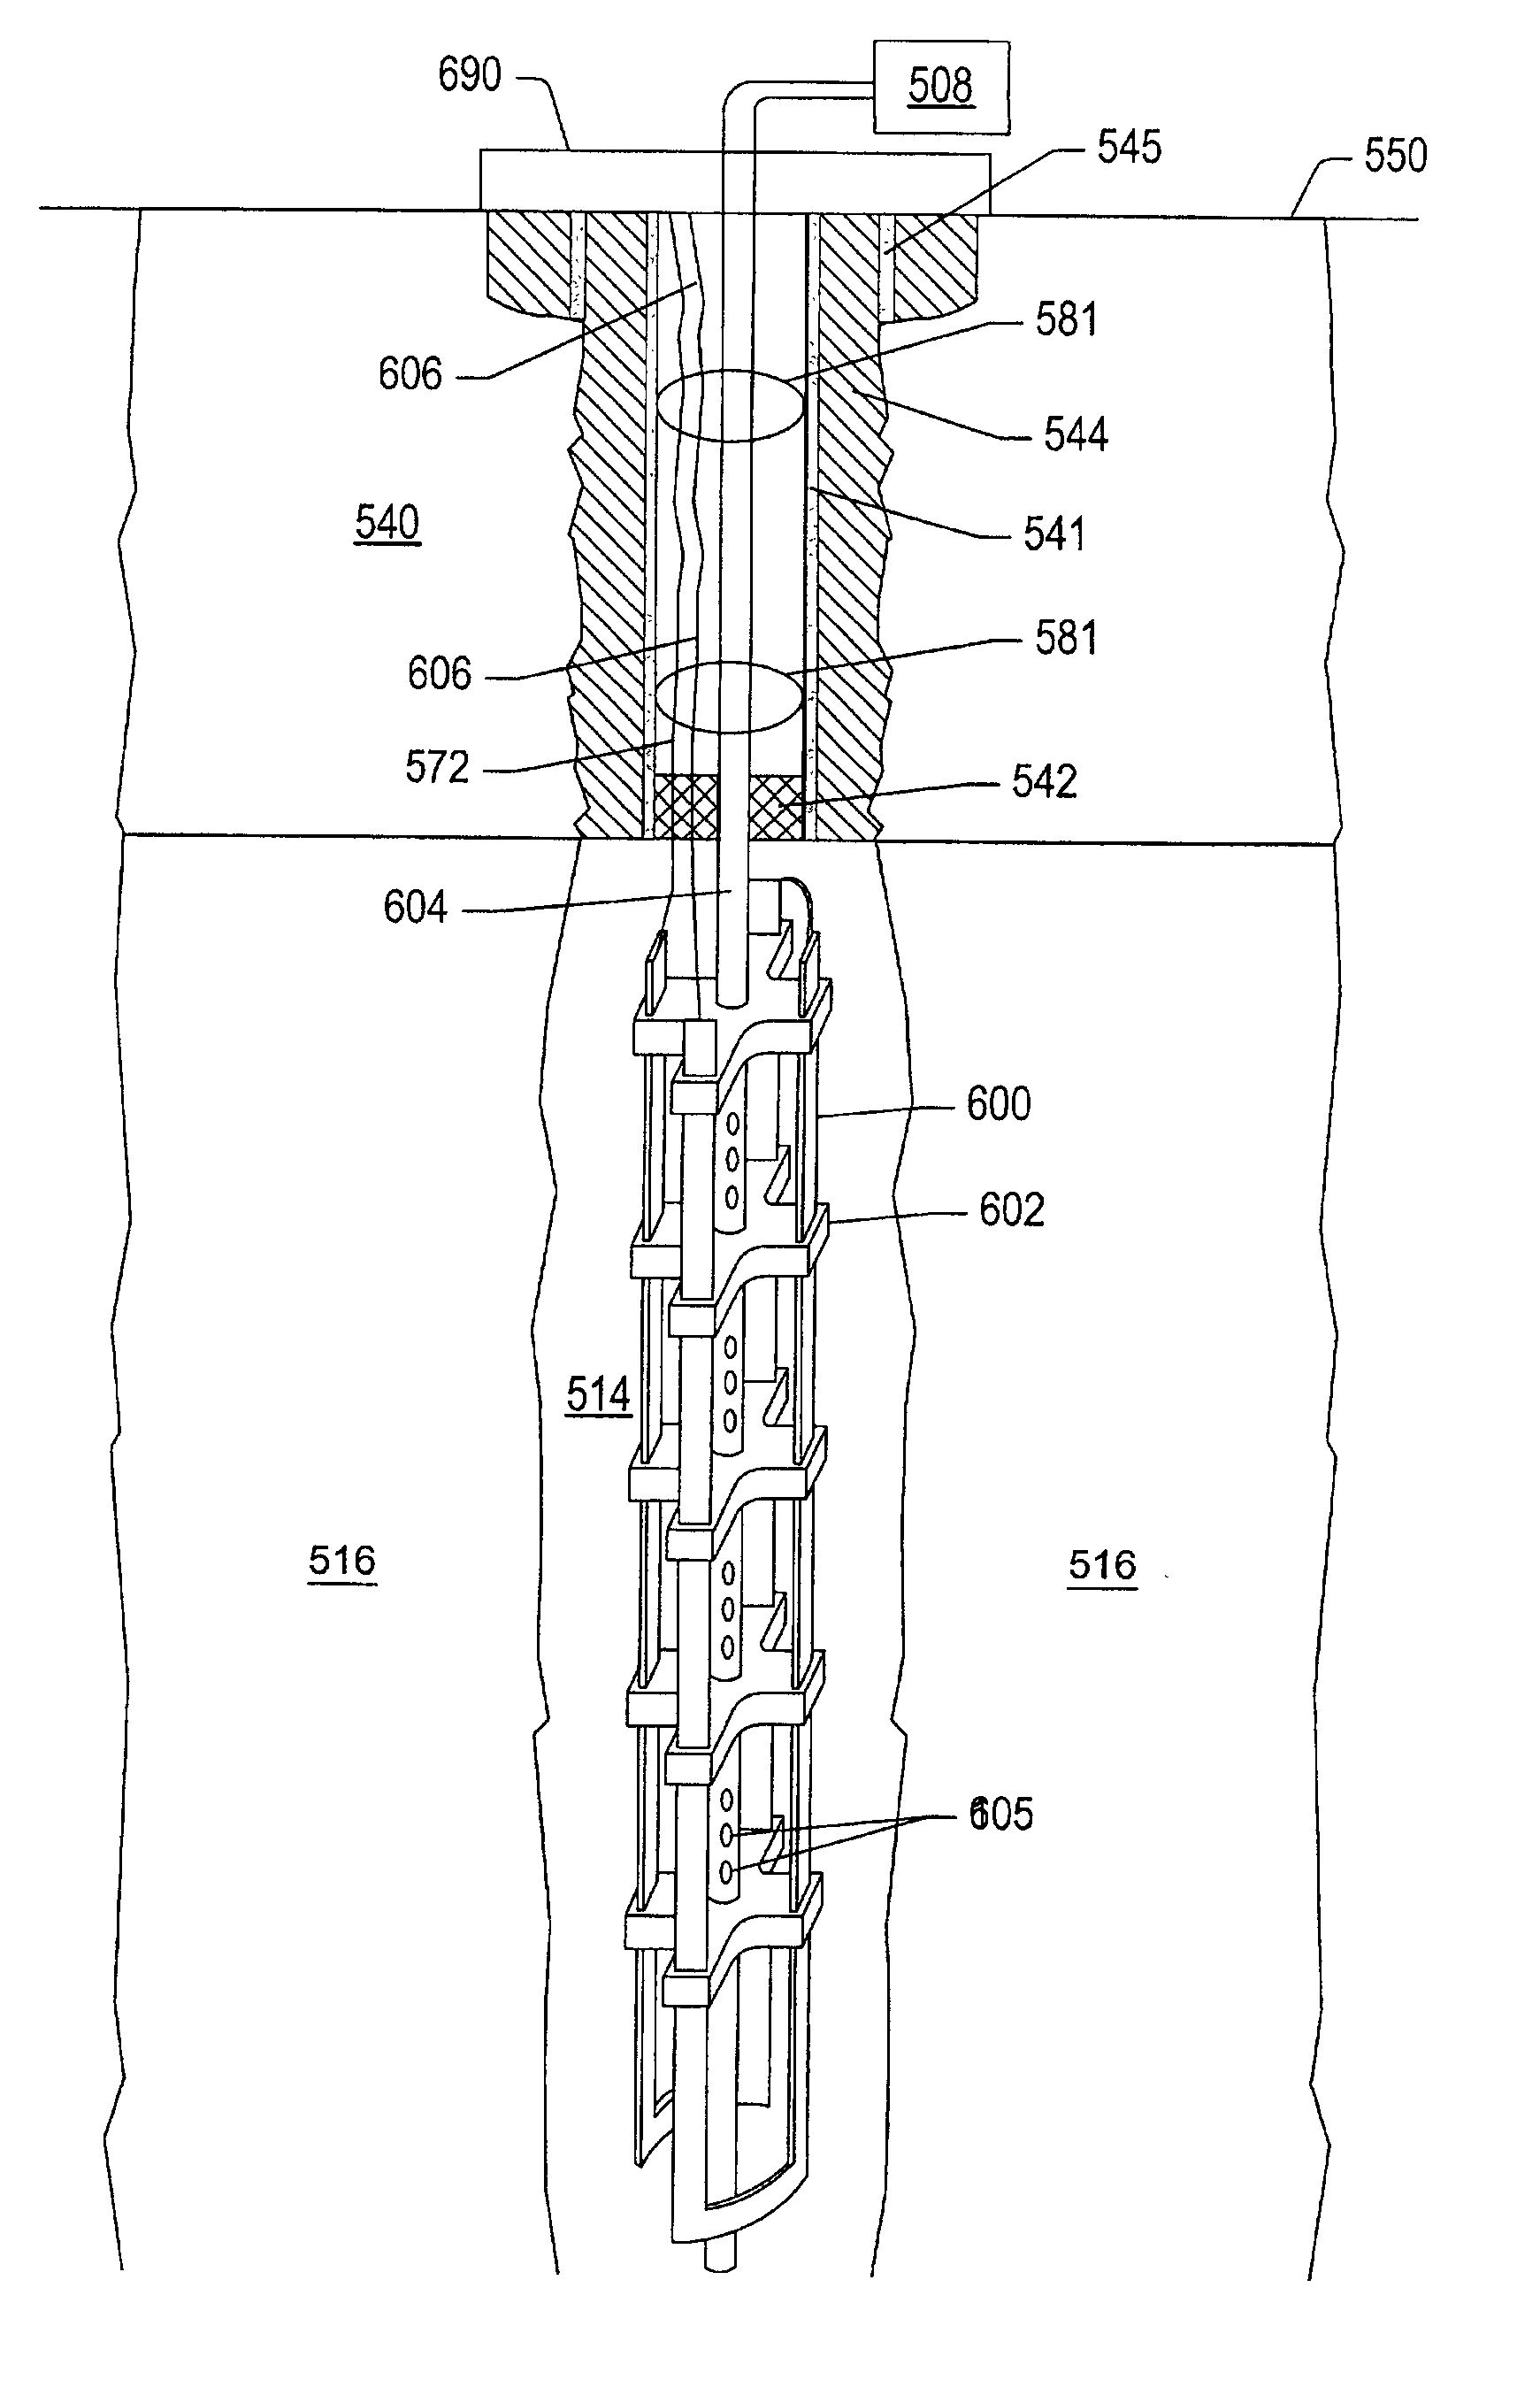 In situ thermal processing of a coal formation using a movable heating element